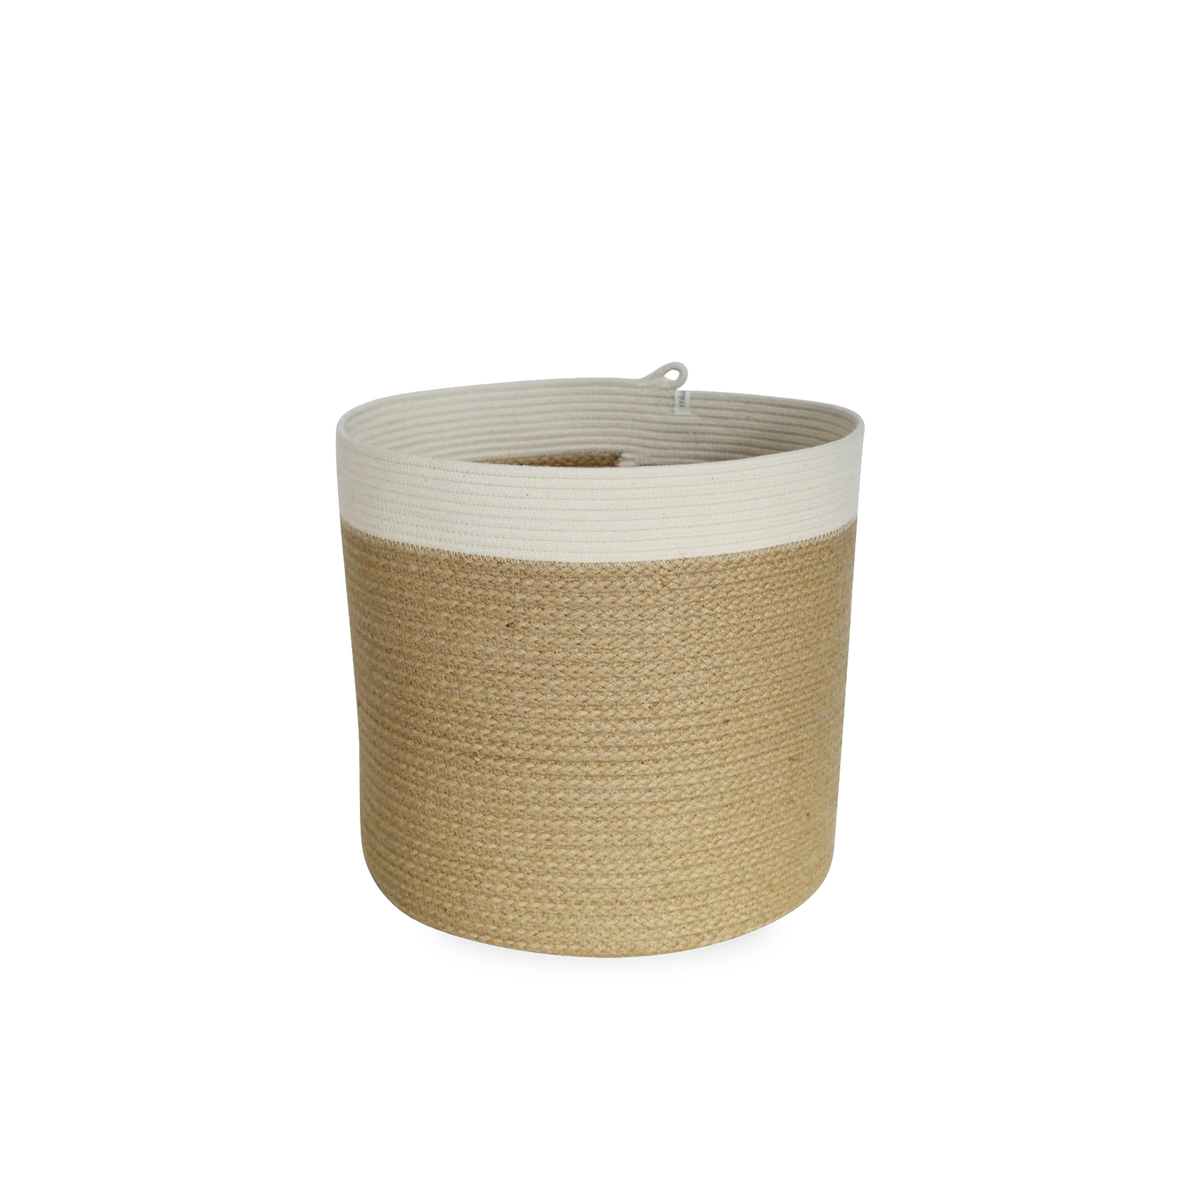 The Jute Cylinder Basket is made from 100% cotton rope that is carefully sewn together with a coiling technique.